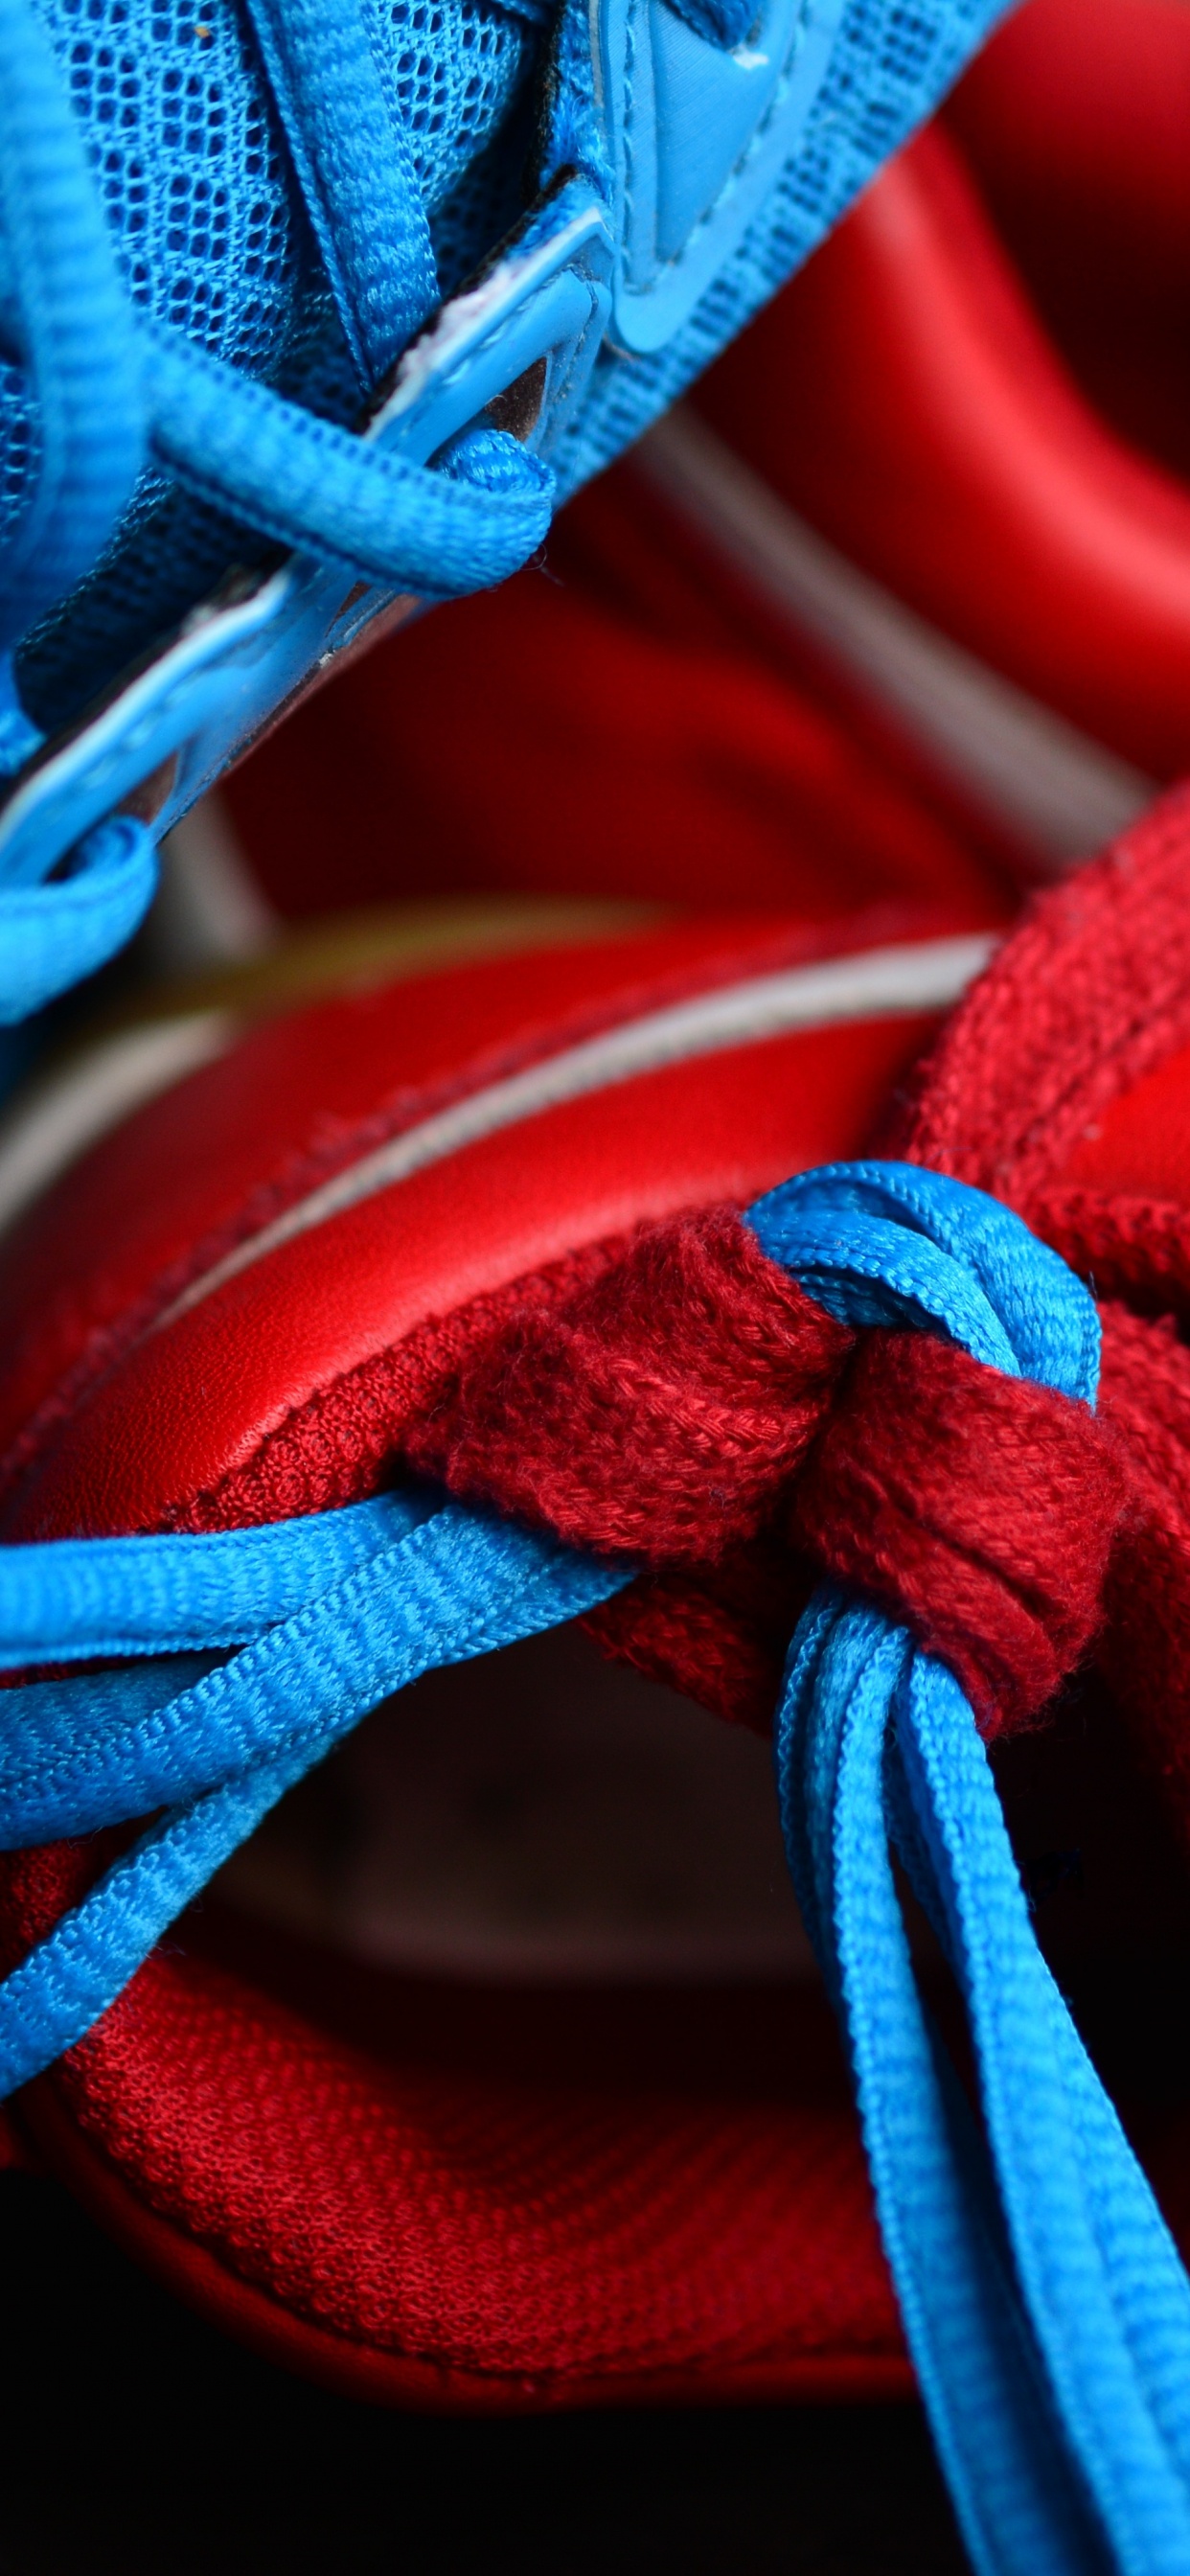 Red and Blue Lace up Shoes. Wallpaper in 1242x2688 Resolution